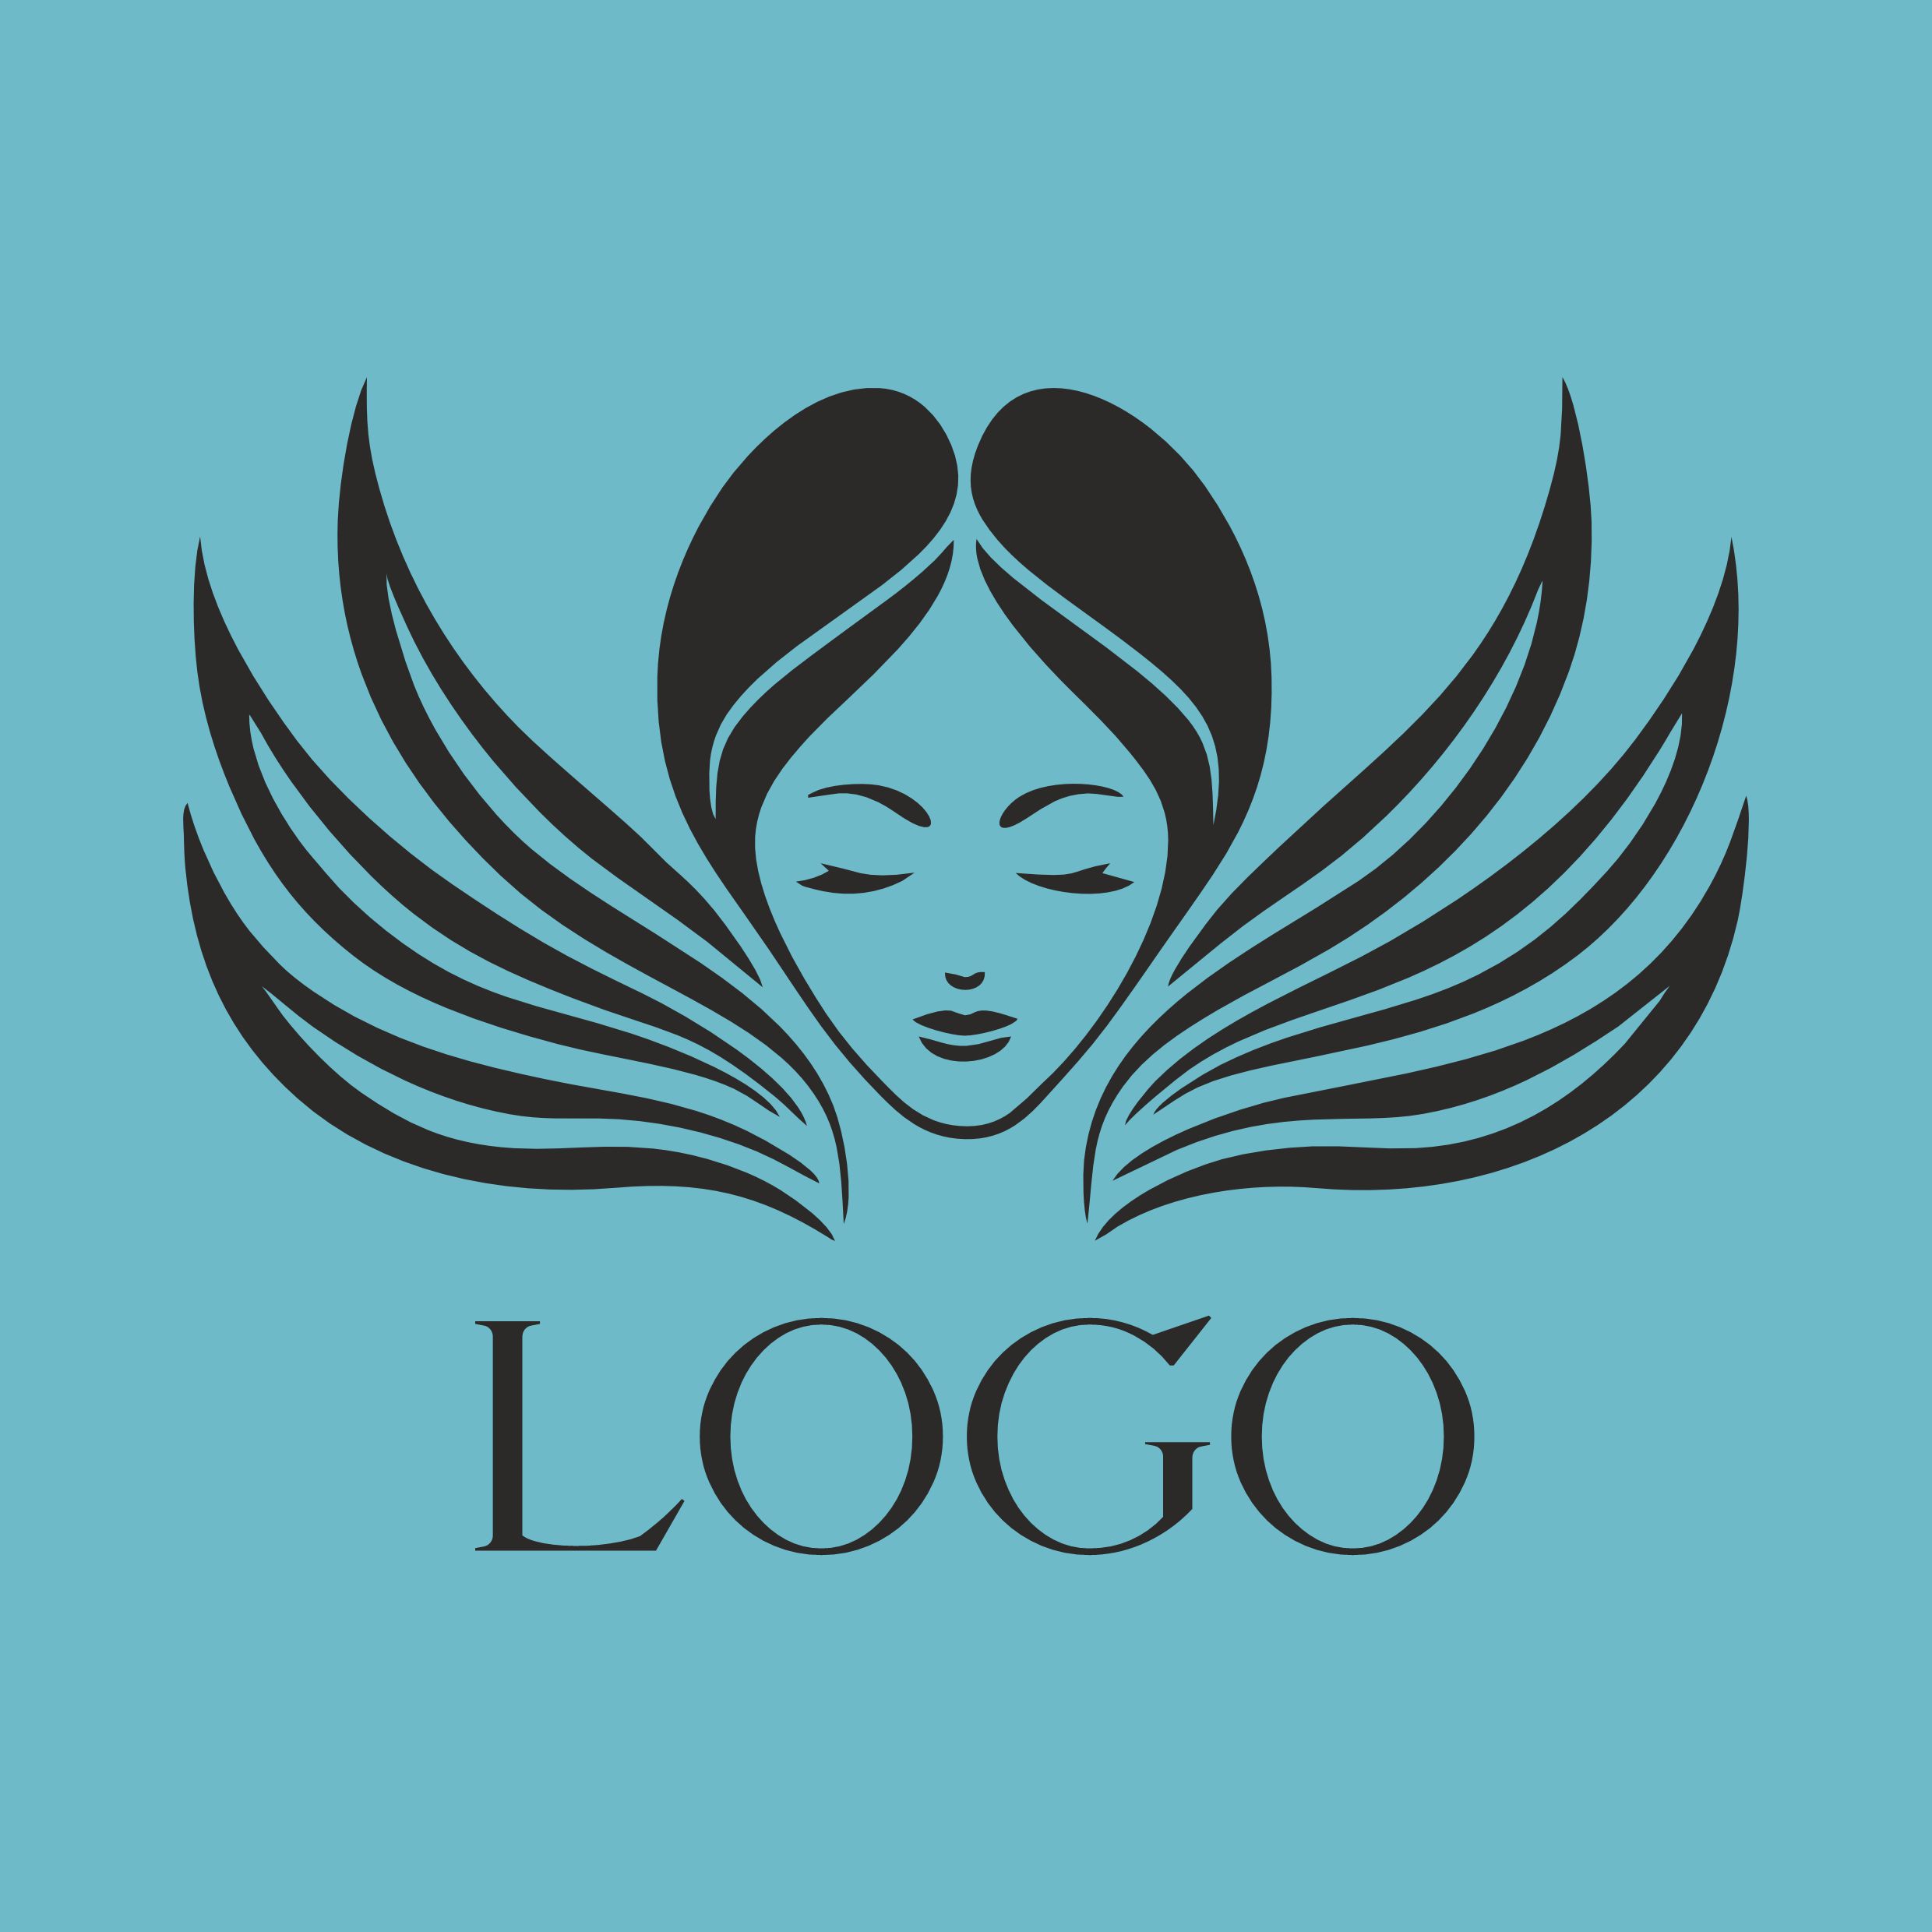 The logo with the image of a female face and wings cover image.